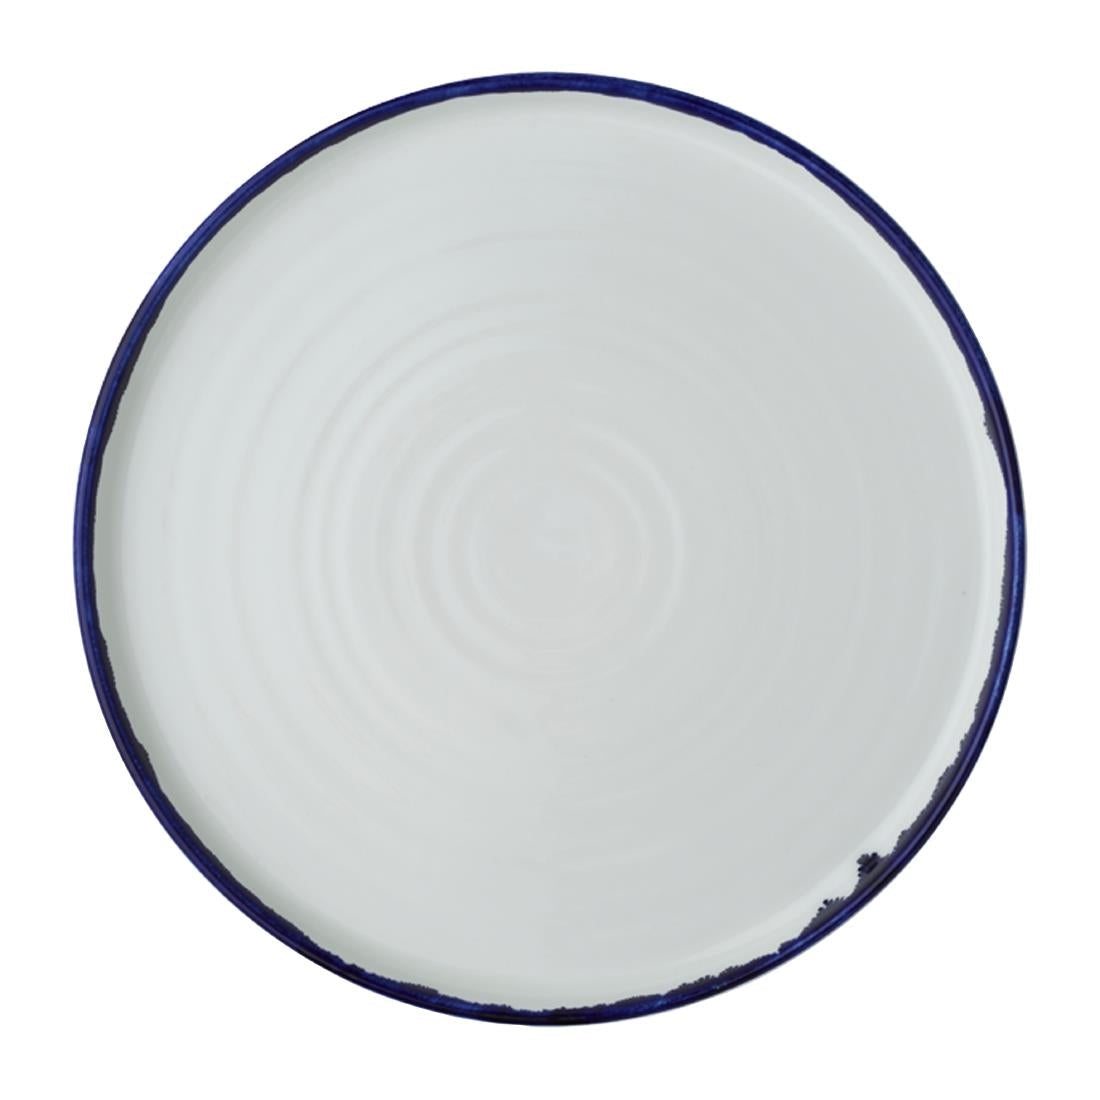 FX153 Dudson Harvest Walled Plates Ink 260mm (Pack of 6) JD Catering Equipment Solutions Ltd